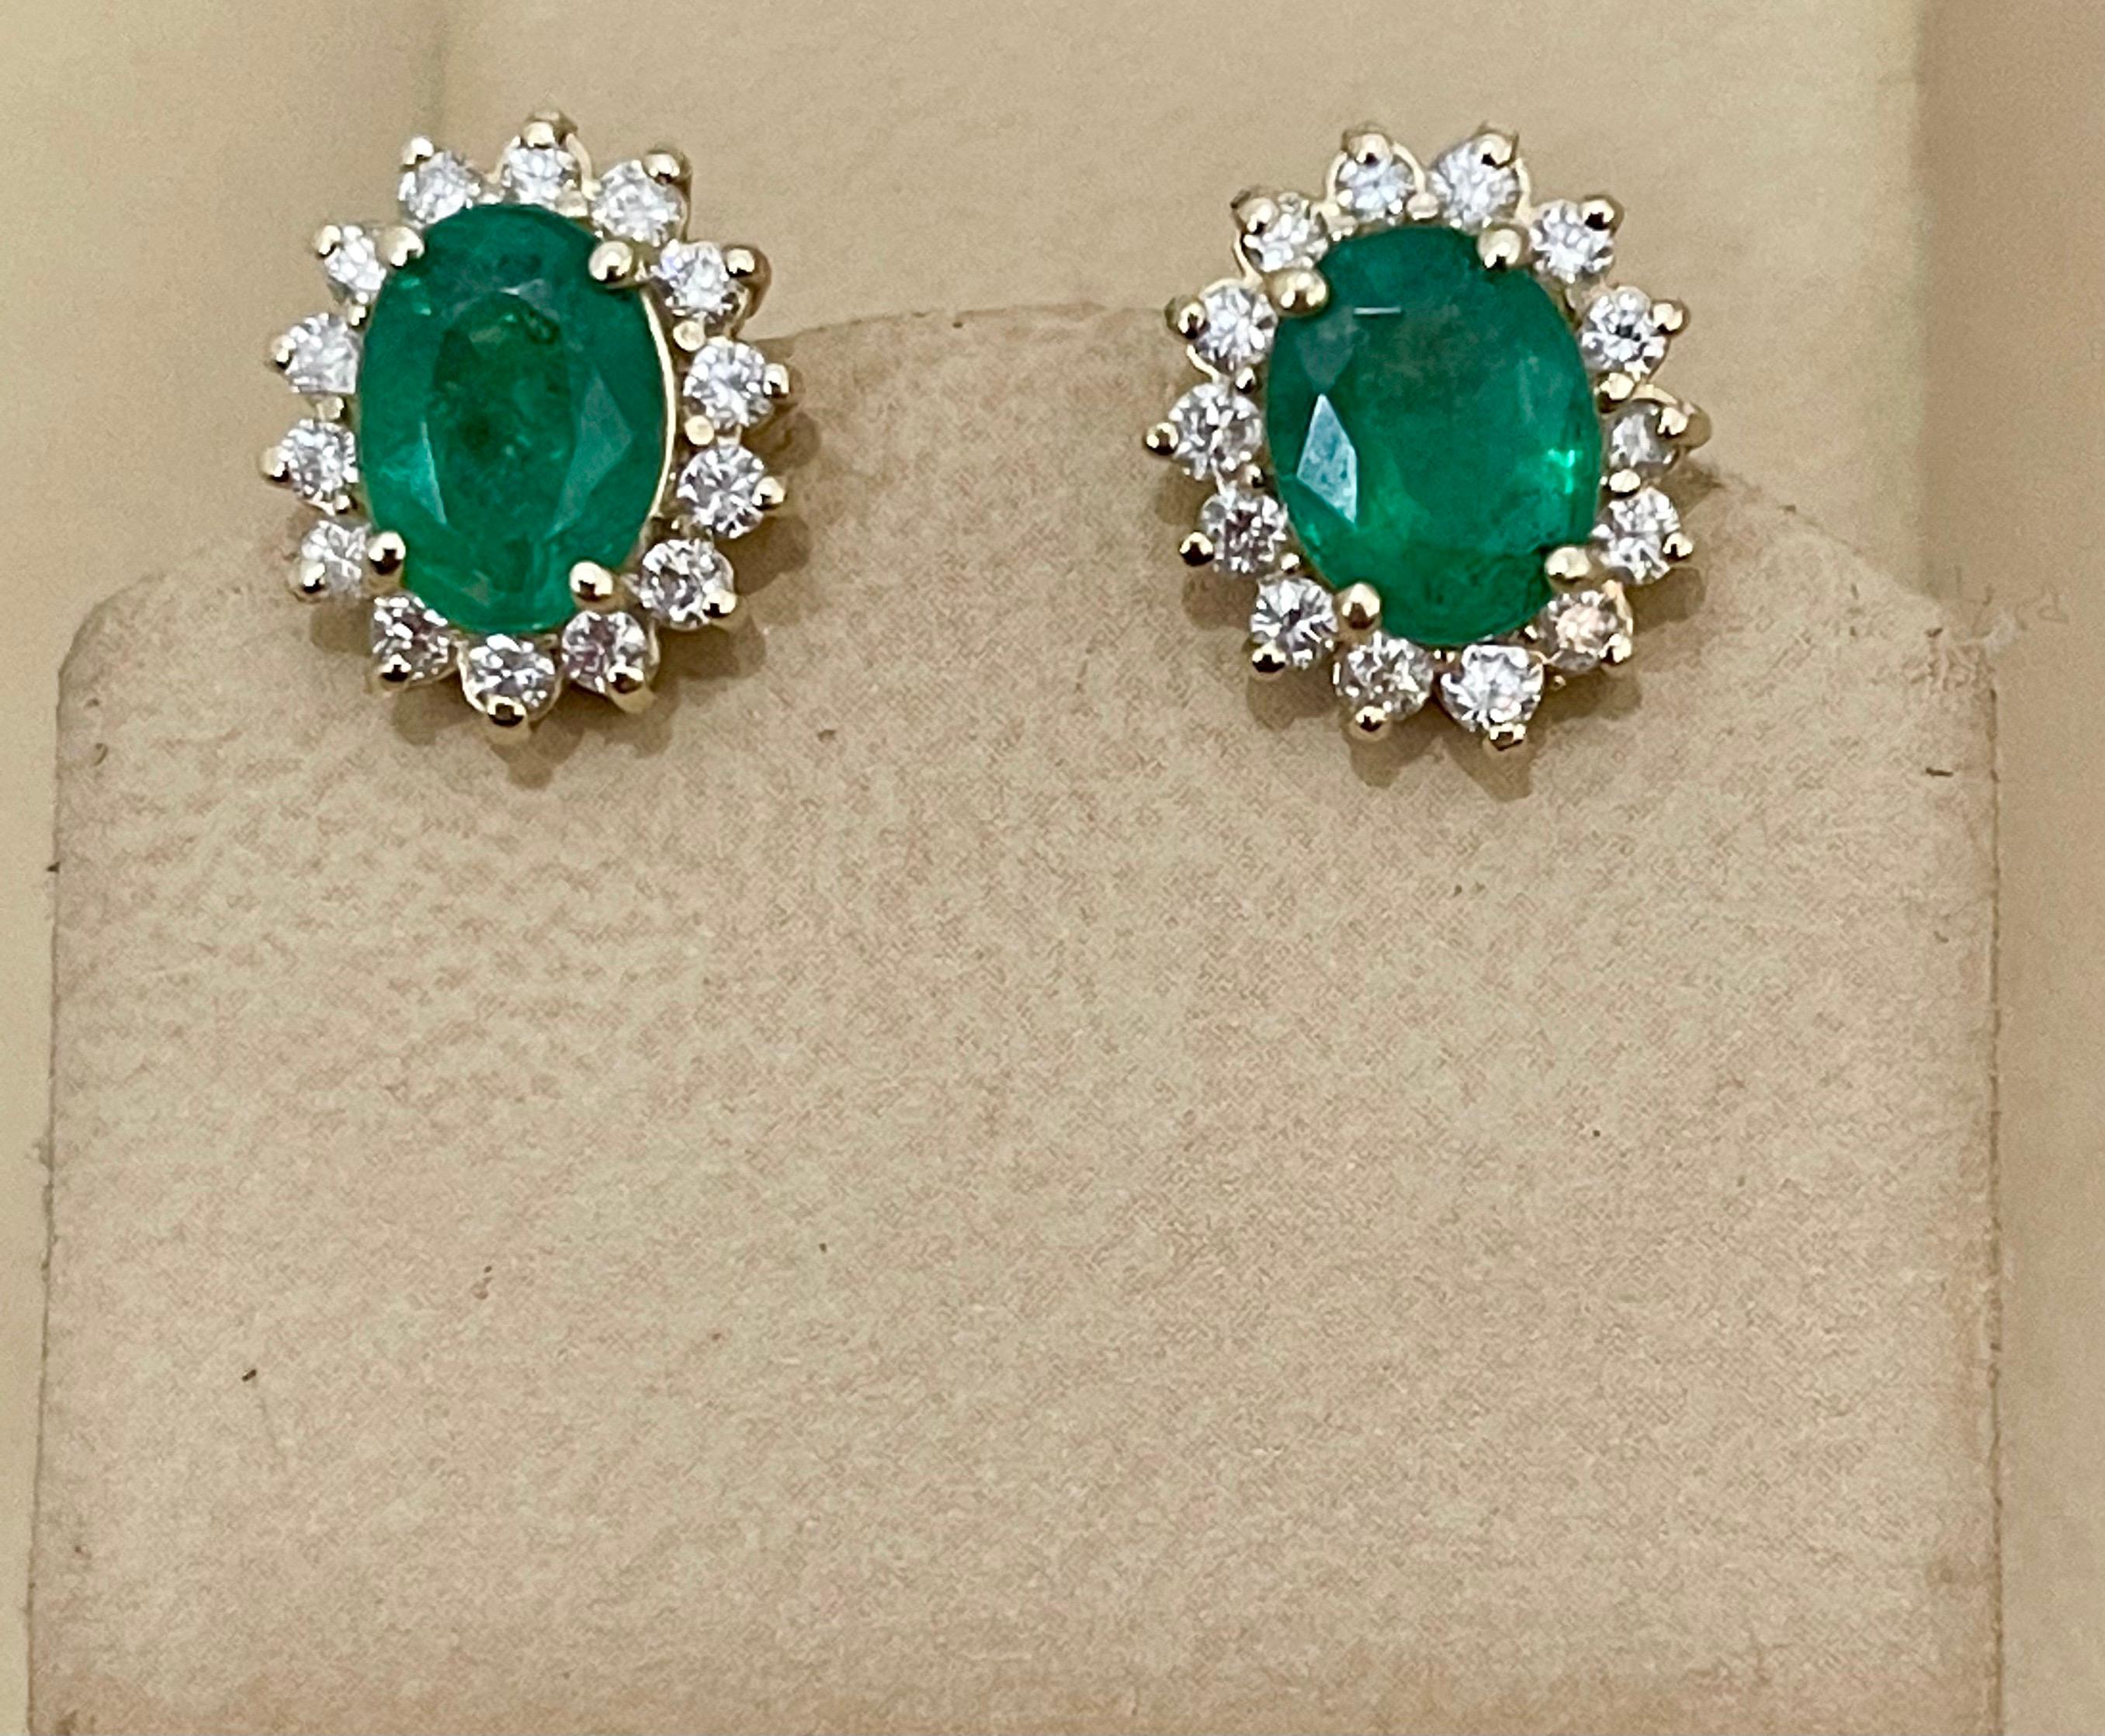 
Approximately 4 Carat Oval Shape Natural Emerald & Diamond Post Back Earrings 14 Karat Yellow  Gold
Two emerald weighing approximately  4 carats Total.

Origin Brazil
Very very fine Quality of   emeralds , Beautiful color and clarity with